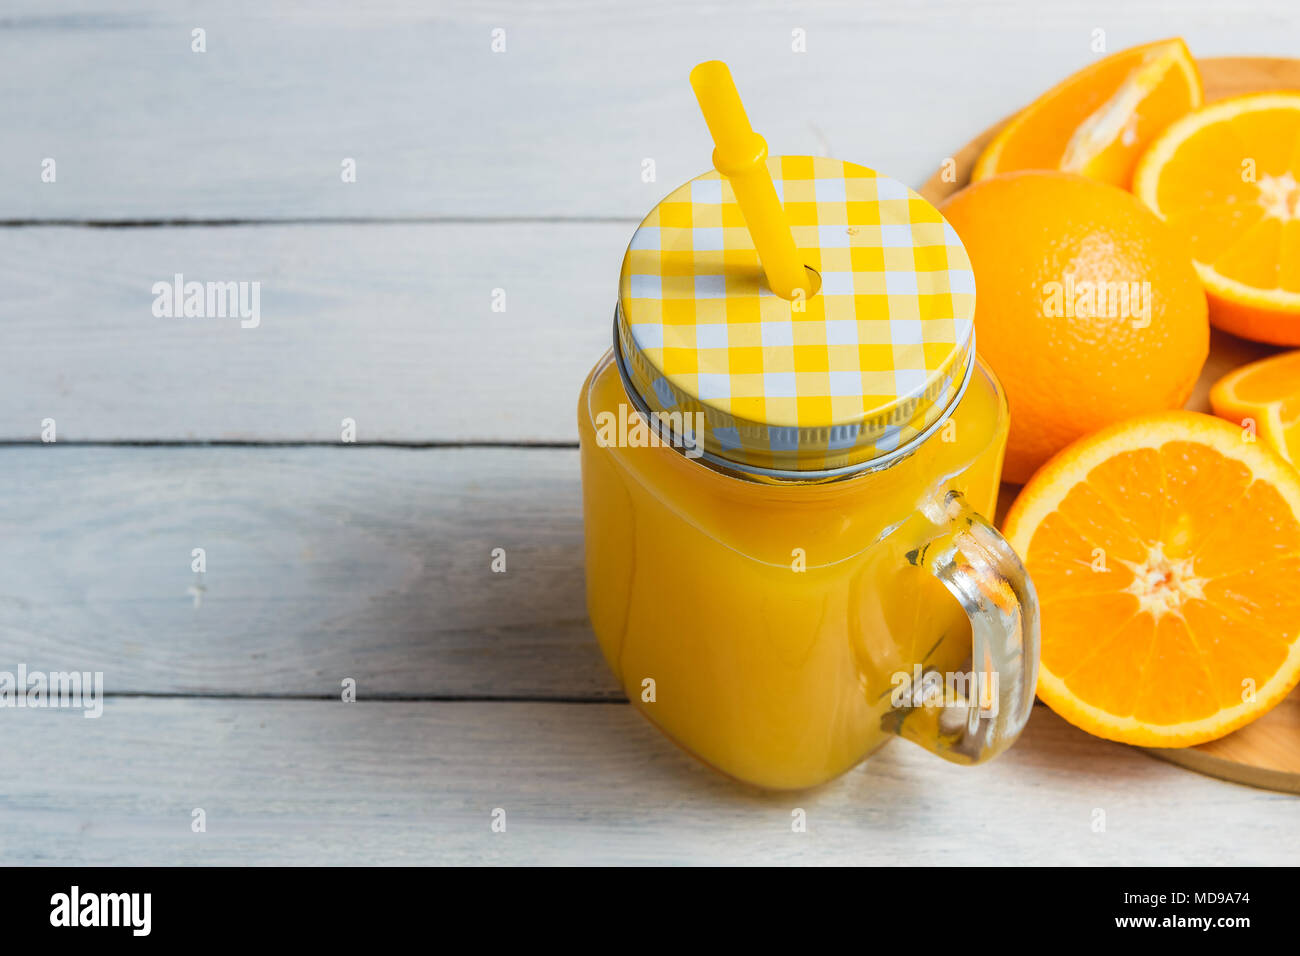 Sliced Orange and Juice Drink on White Wooden Background. Healthy Concept with Copyspace. Stock Photo